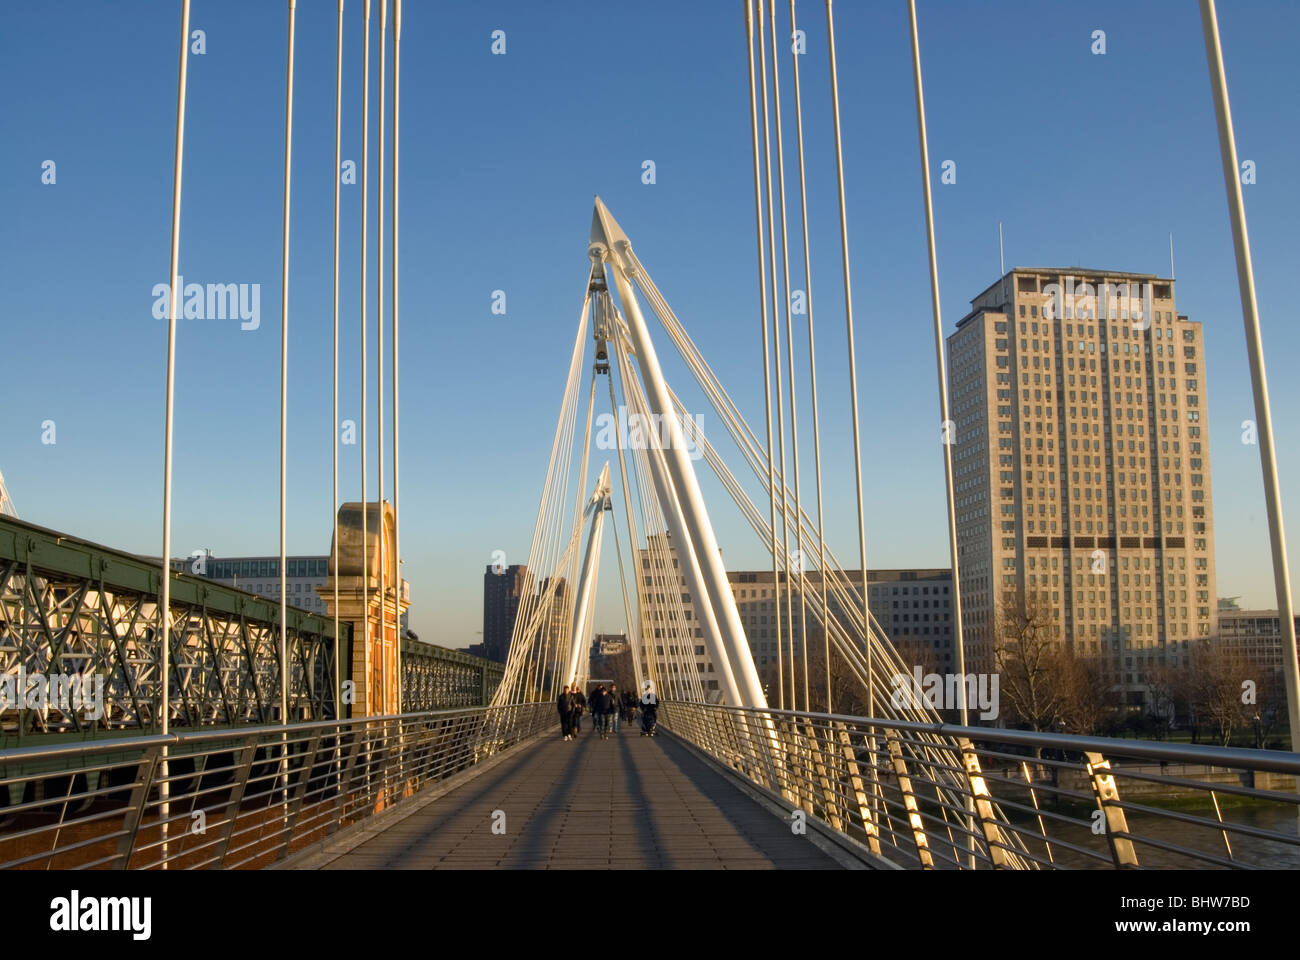 People walking along the Golden Jubilee Bridge in central London with the Shell building in the background. Stock Photo